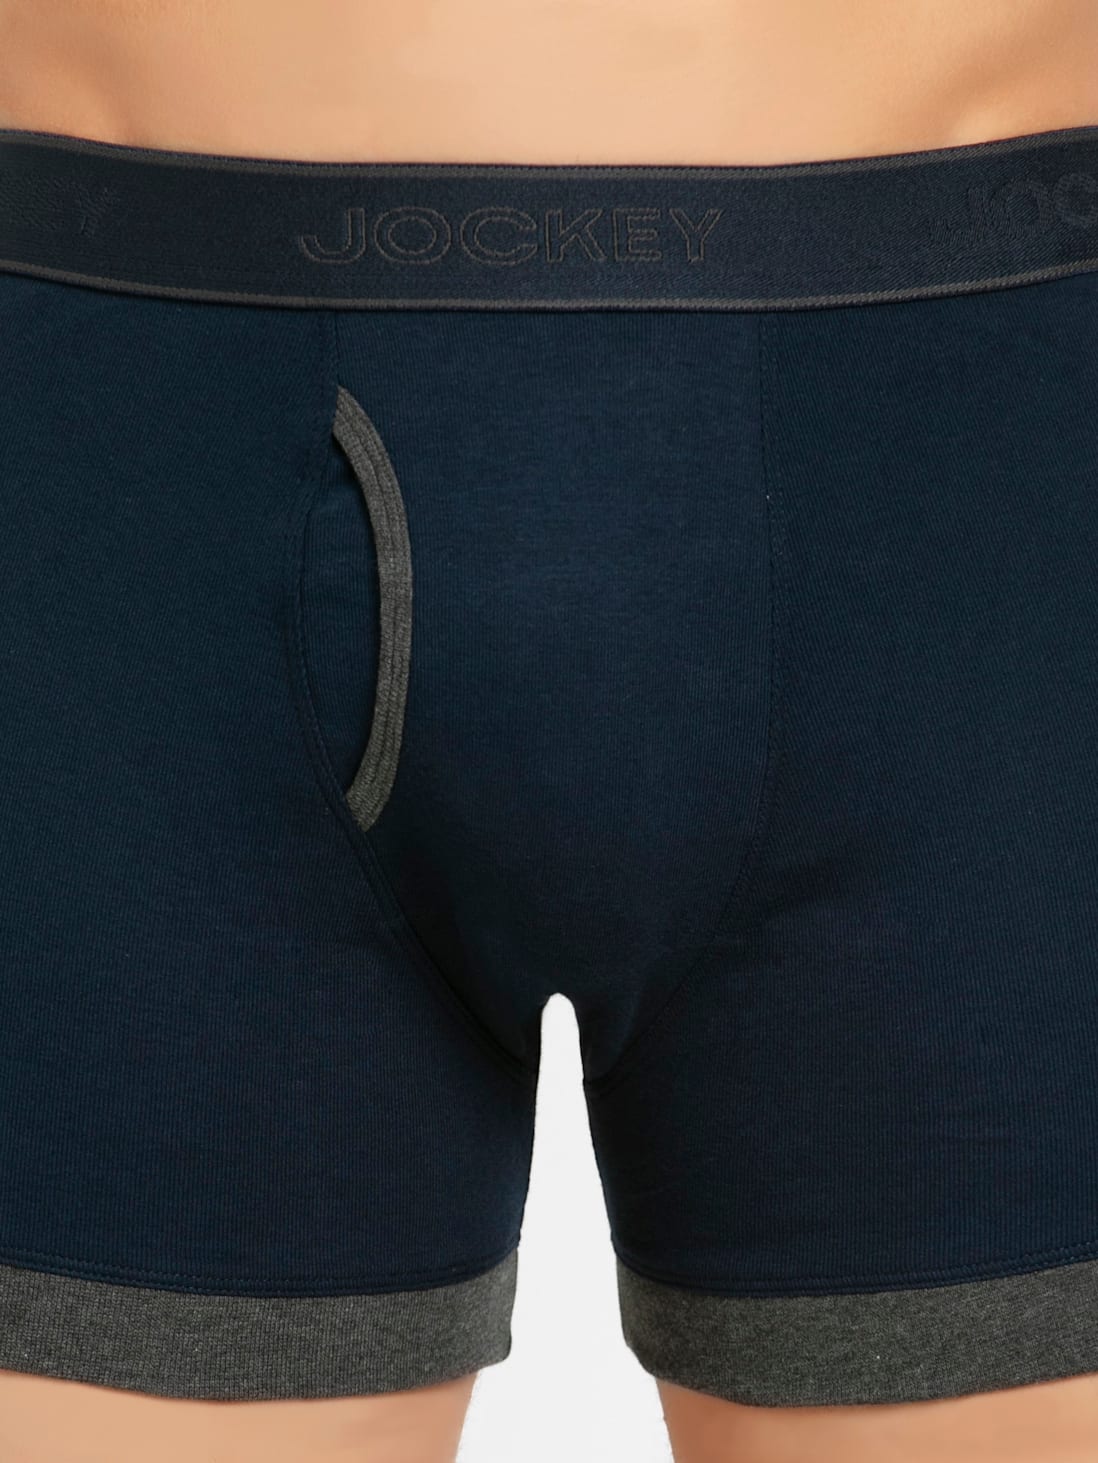 Navy & Charcoal Melange Boxer Briefs with Front Fly for Men 1017 ...